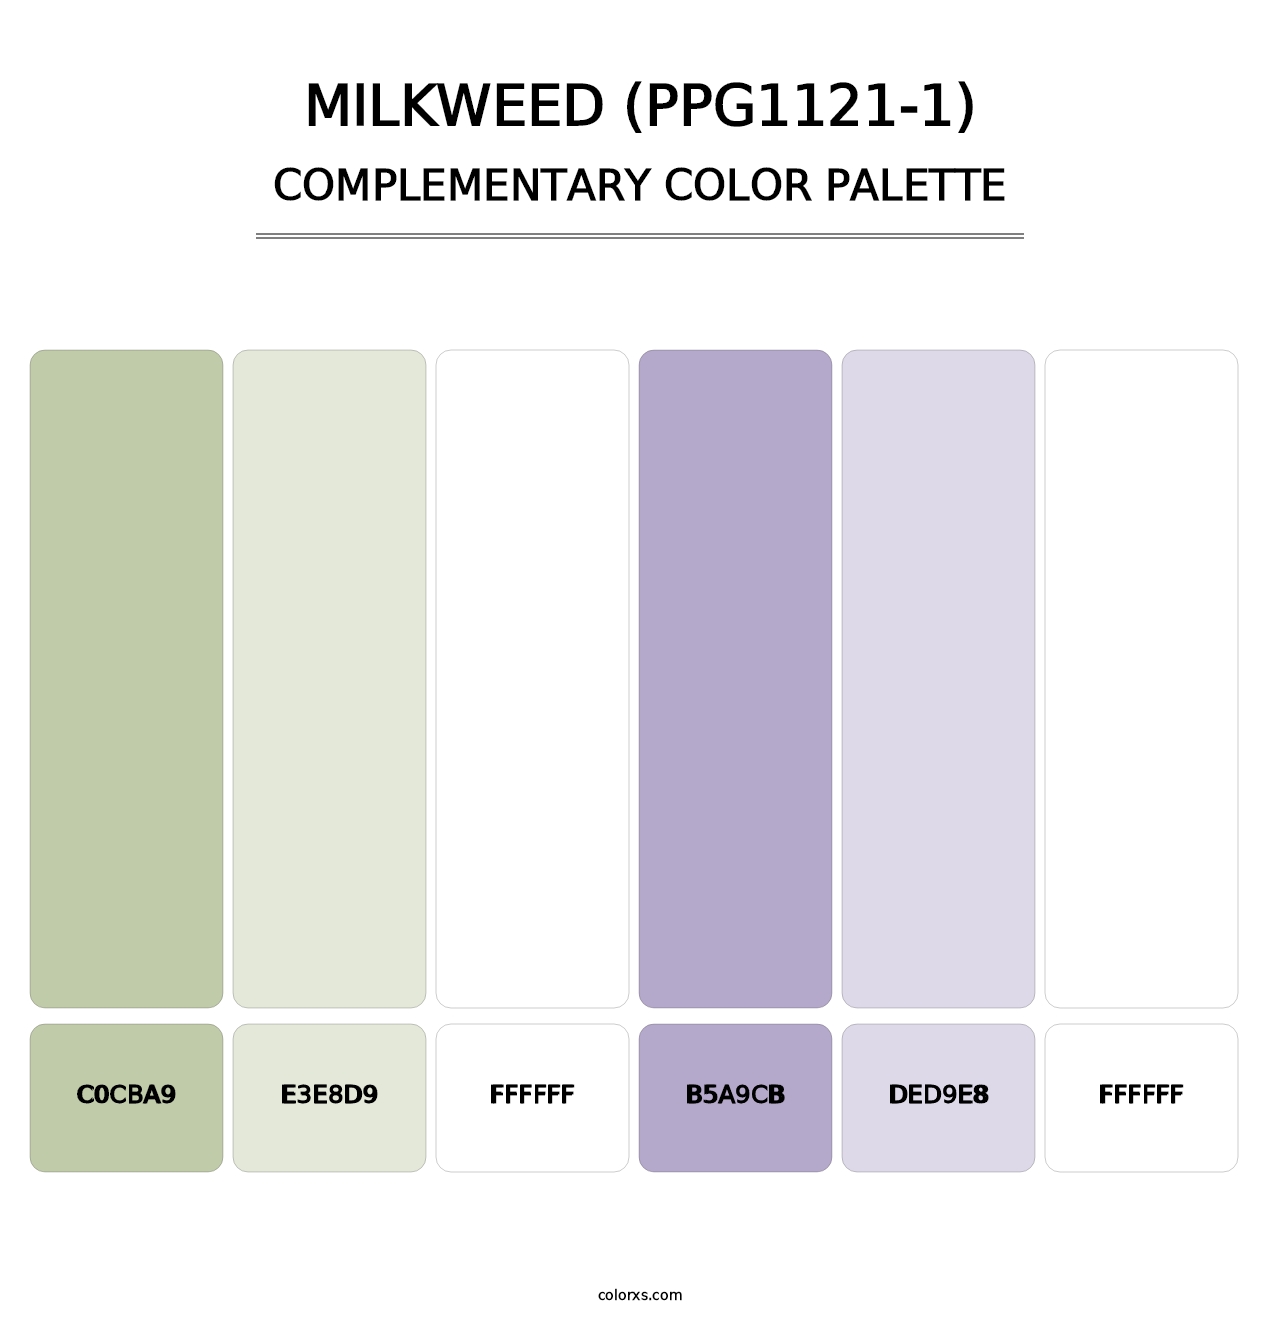 Milkweed (PPG1121-1) - Complementary Color Palette